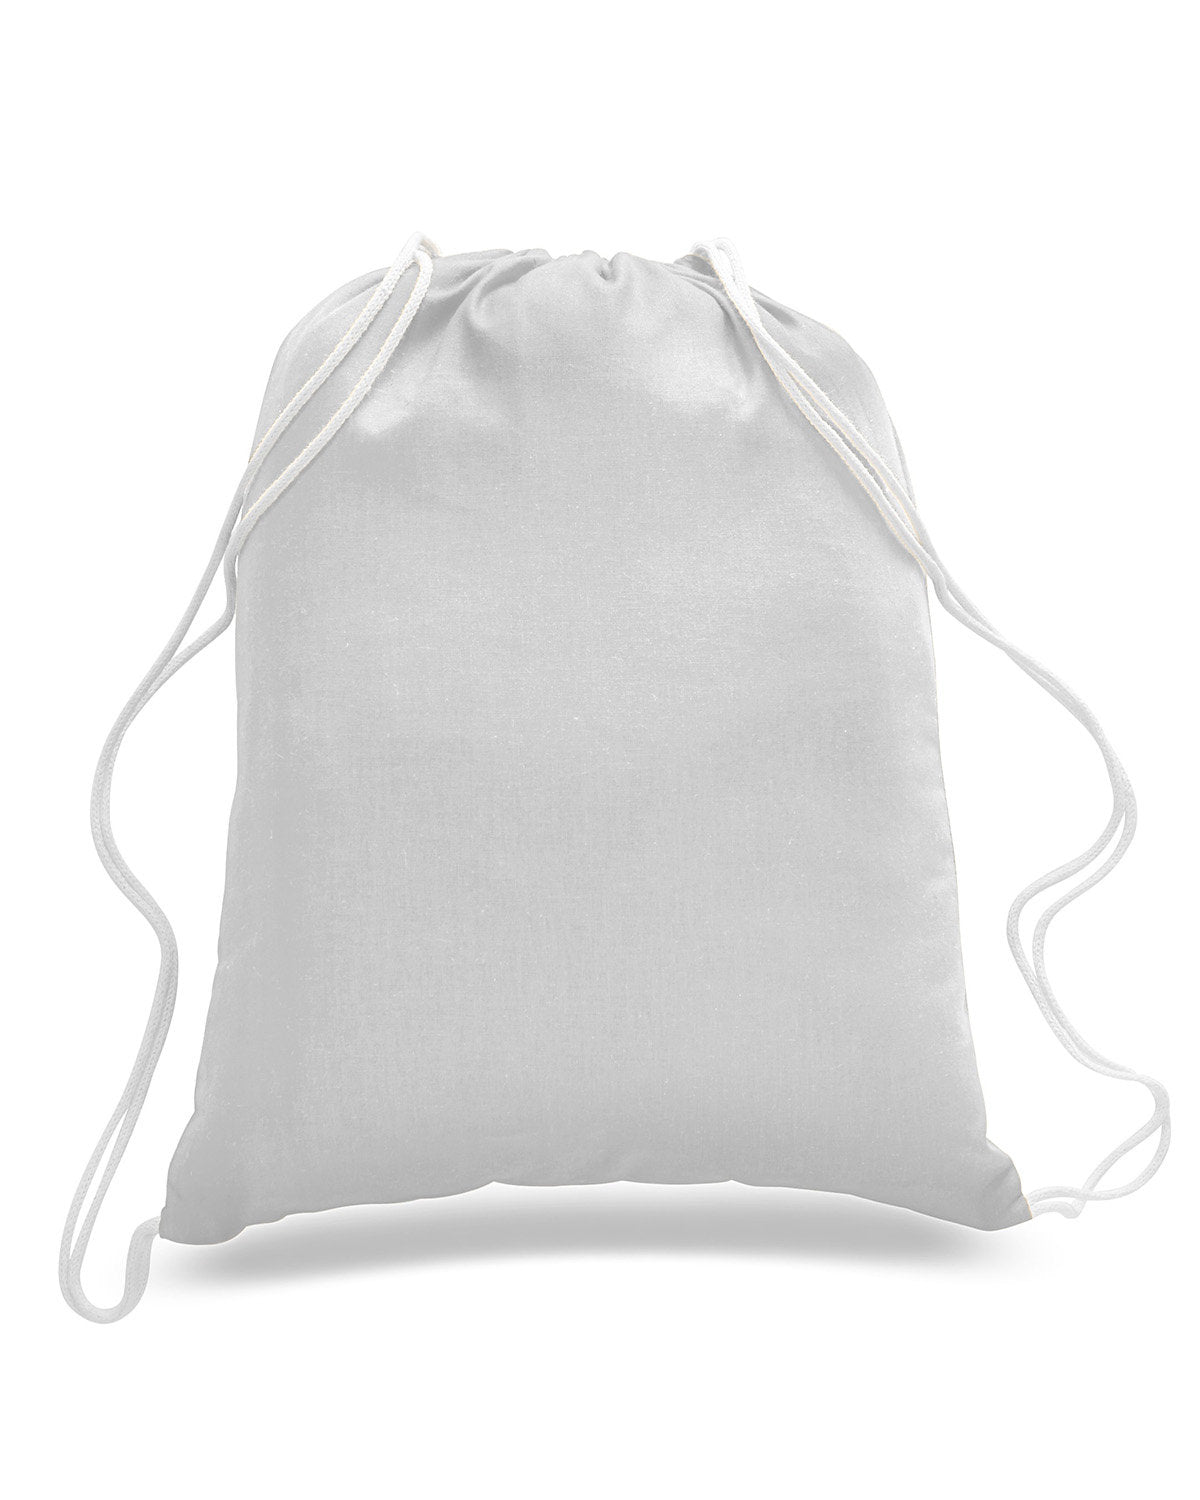 OAD101-OAD-WHITE-OAD-Bags and Accessories-1